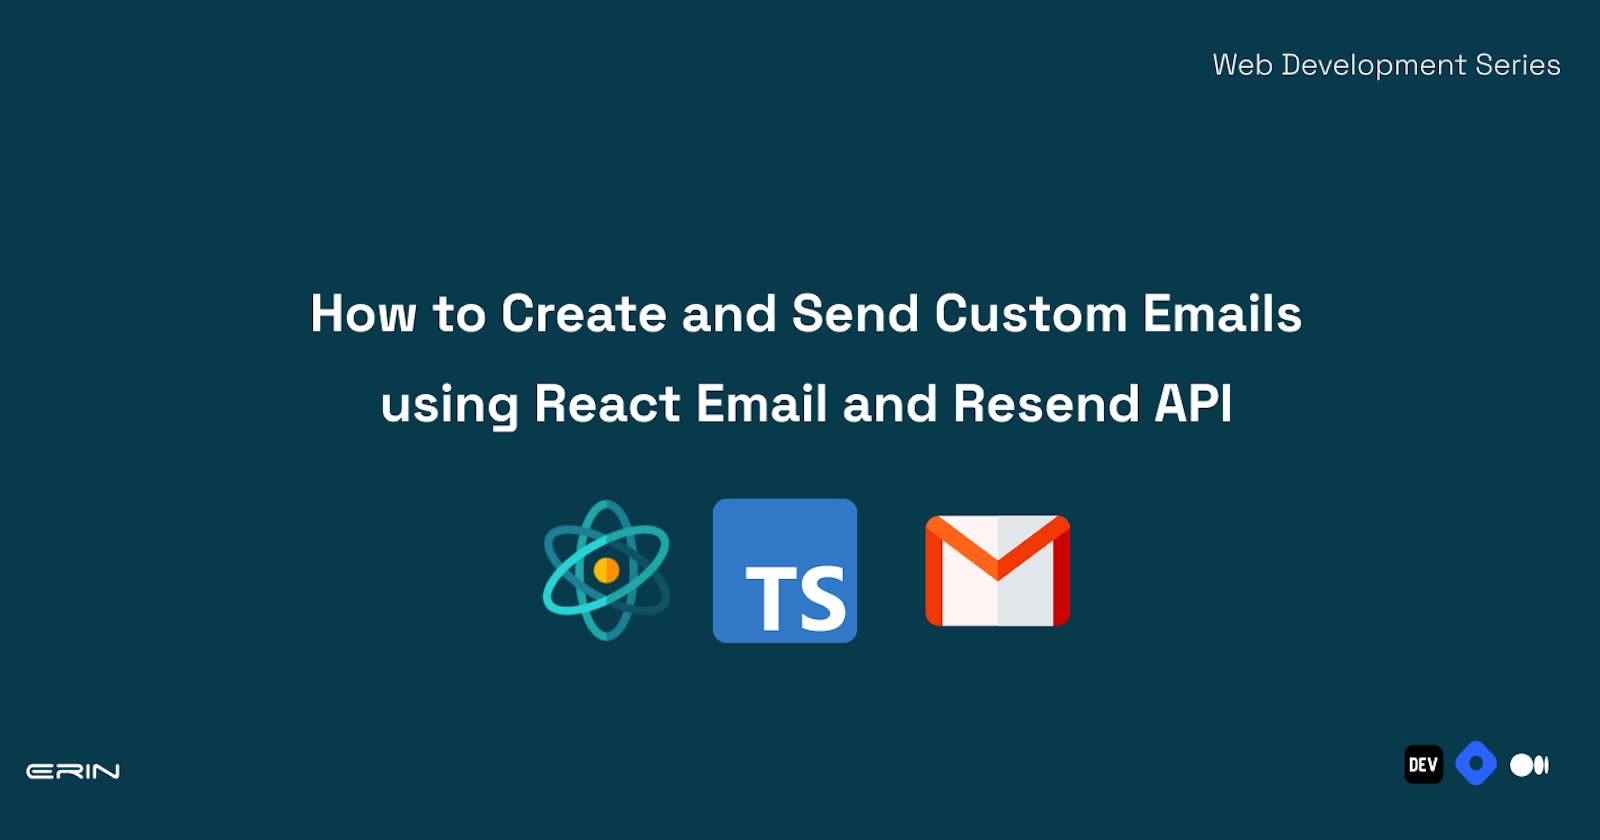 How to Create and Send Custom Emails using React Email and Resend API